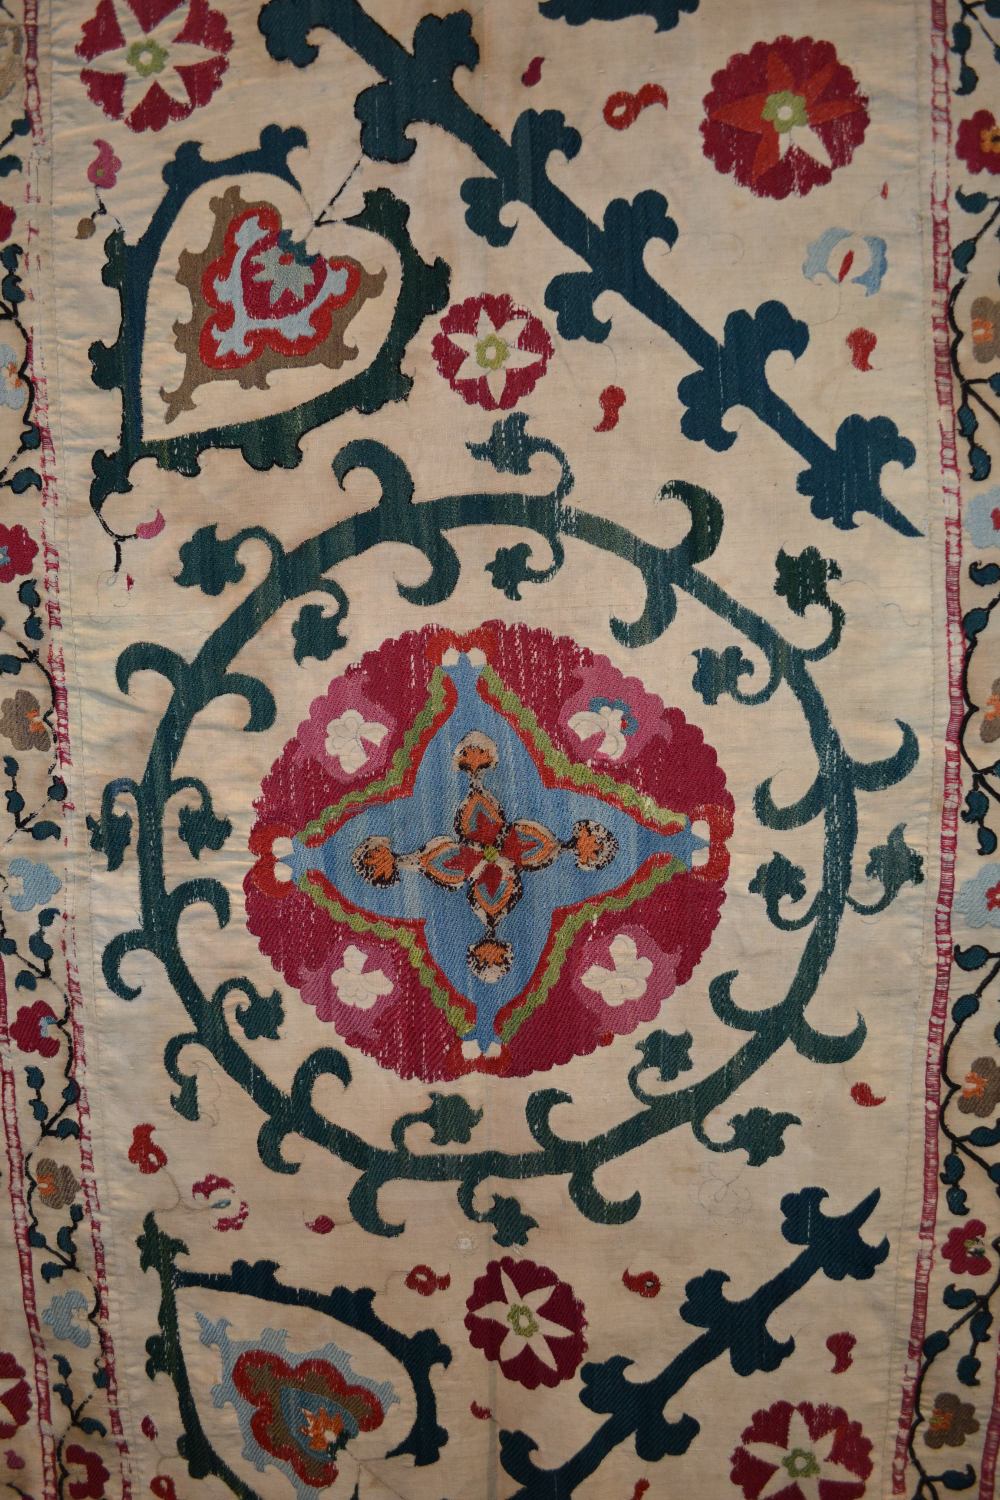 Attractive suzani, probably Bokhara, Uzbekistan, late 19th/early 20th century, cotton ground - Image 6 of 8